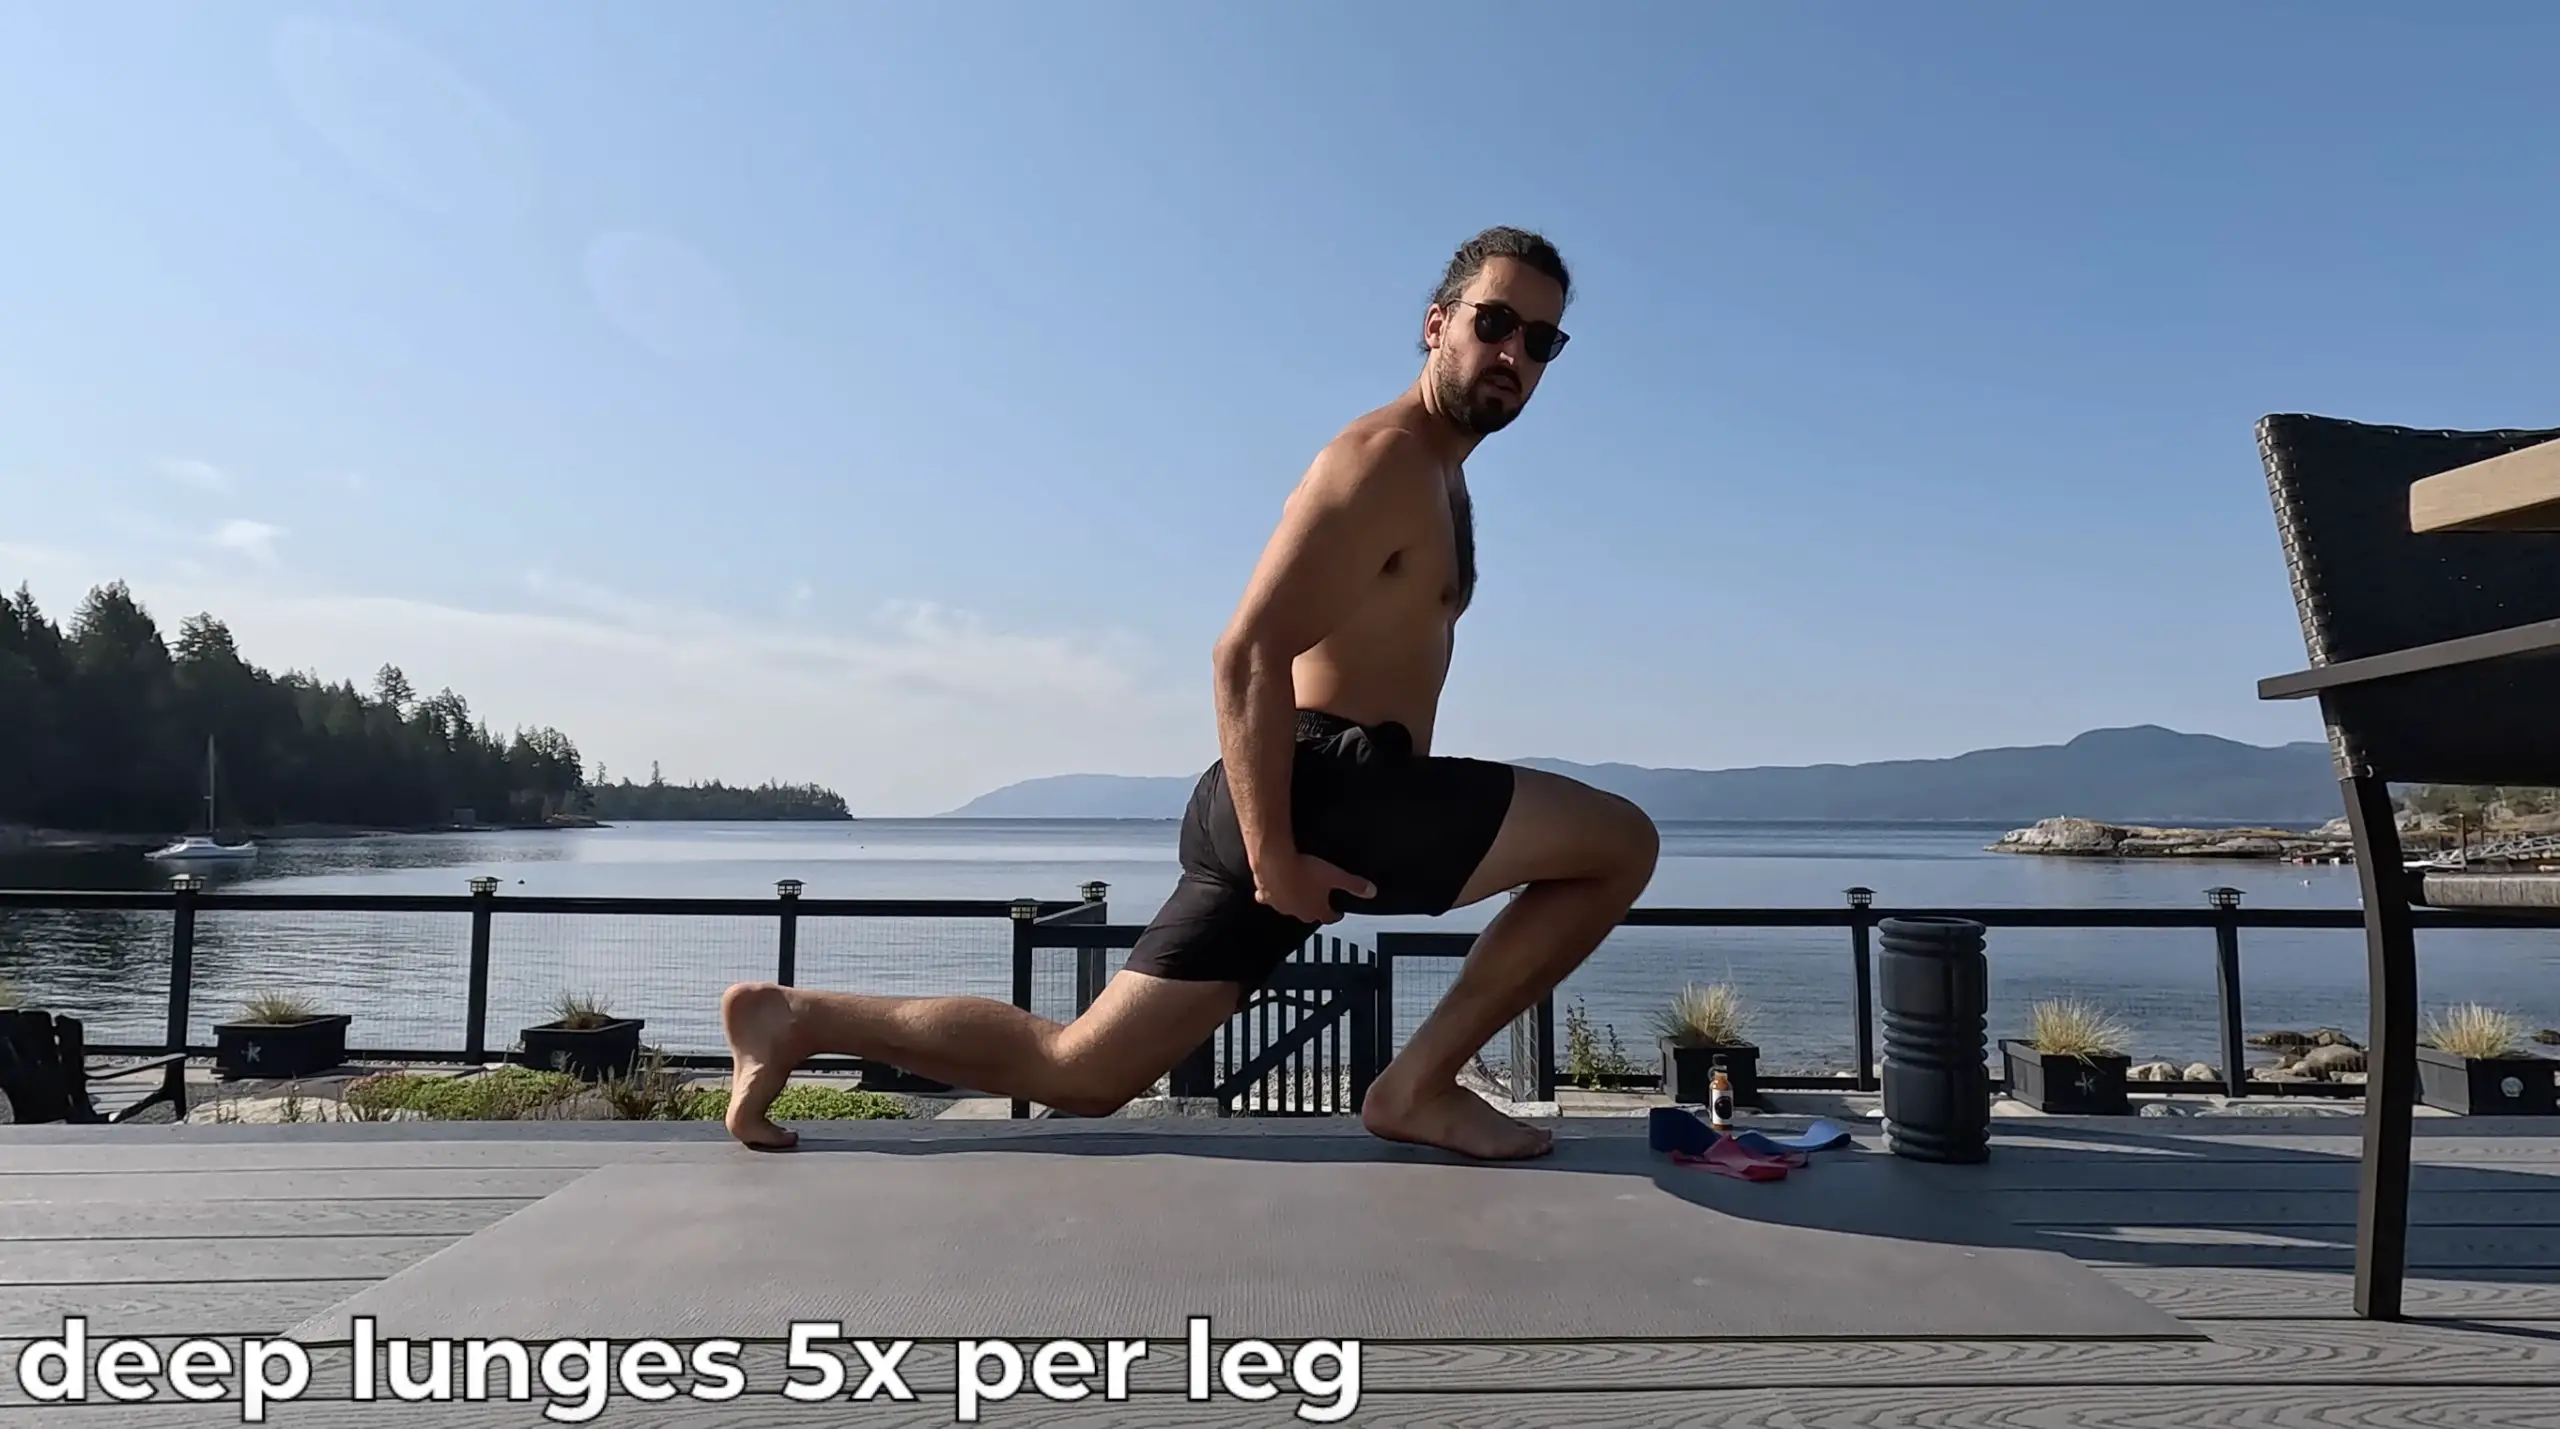 Deep lungs - a great exercise to fix knee pain, strengthen muscles and increase flexibility 